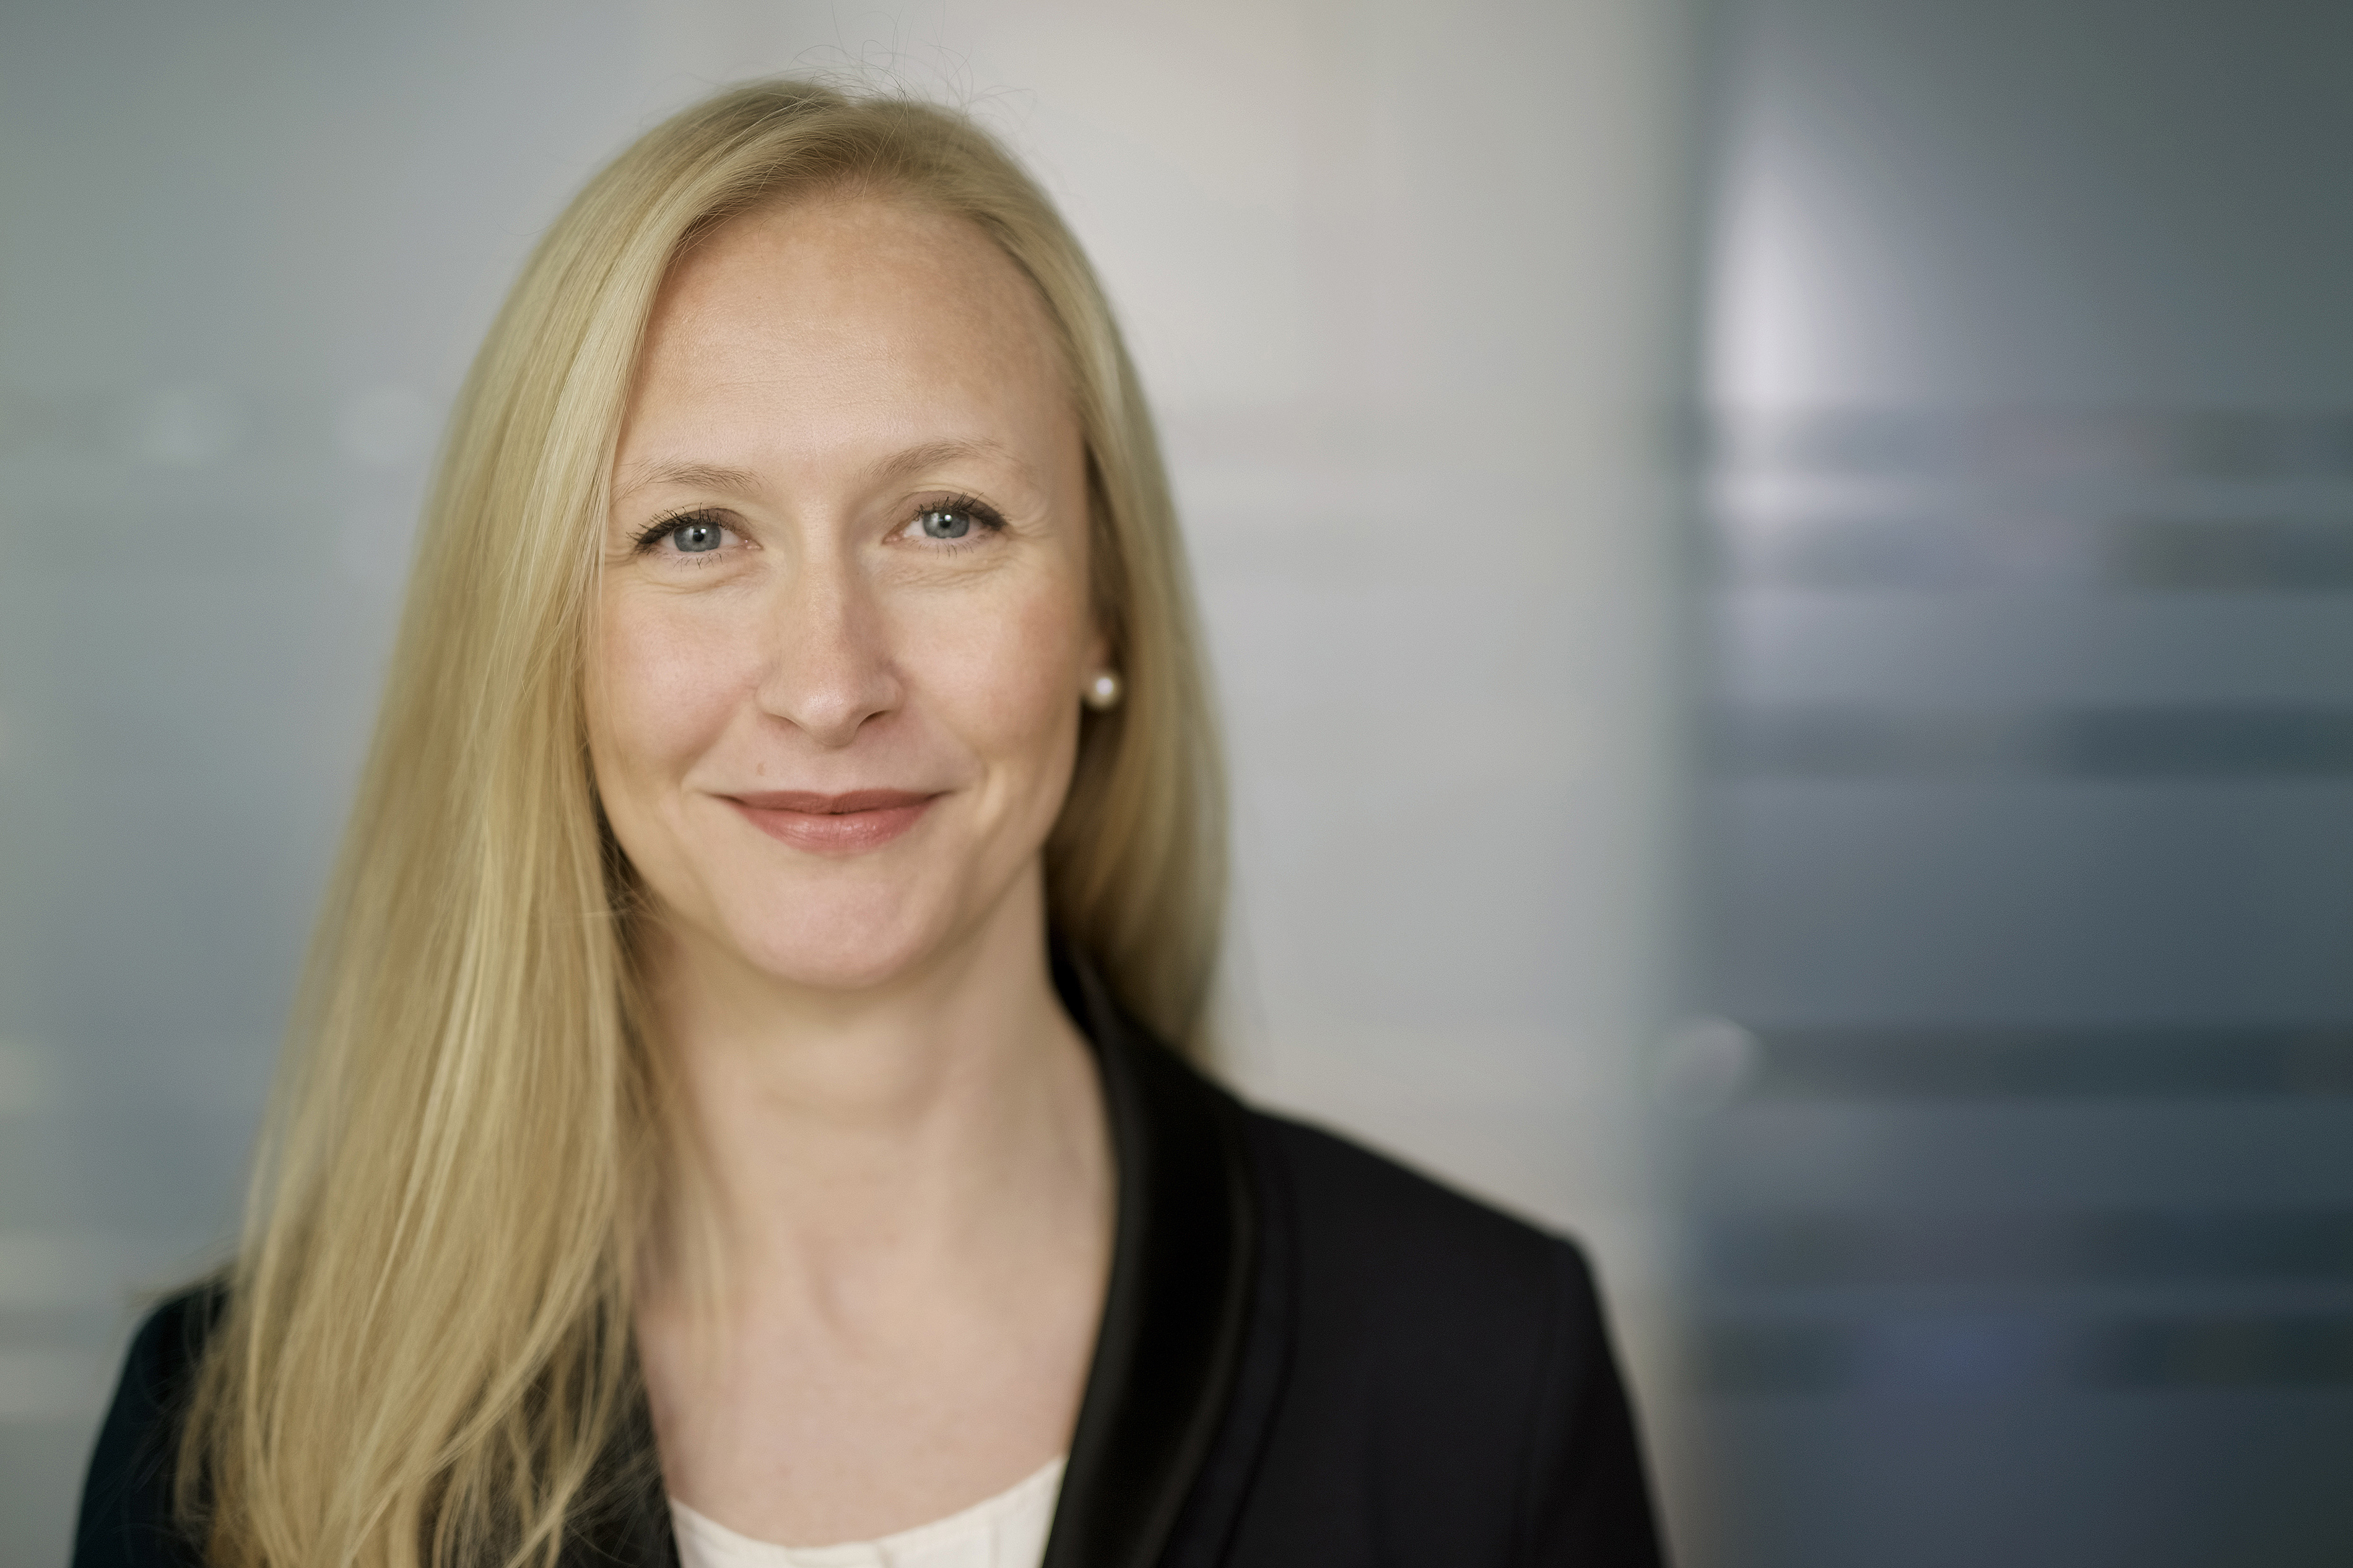 Renate Larsen, CEO of the Norwegian Seafood Council announced she is stepping down in 2022